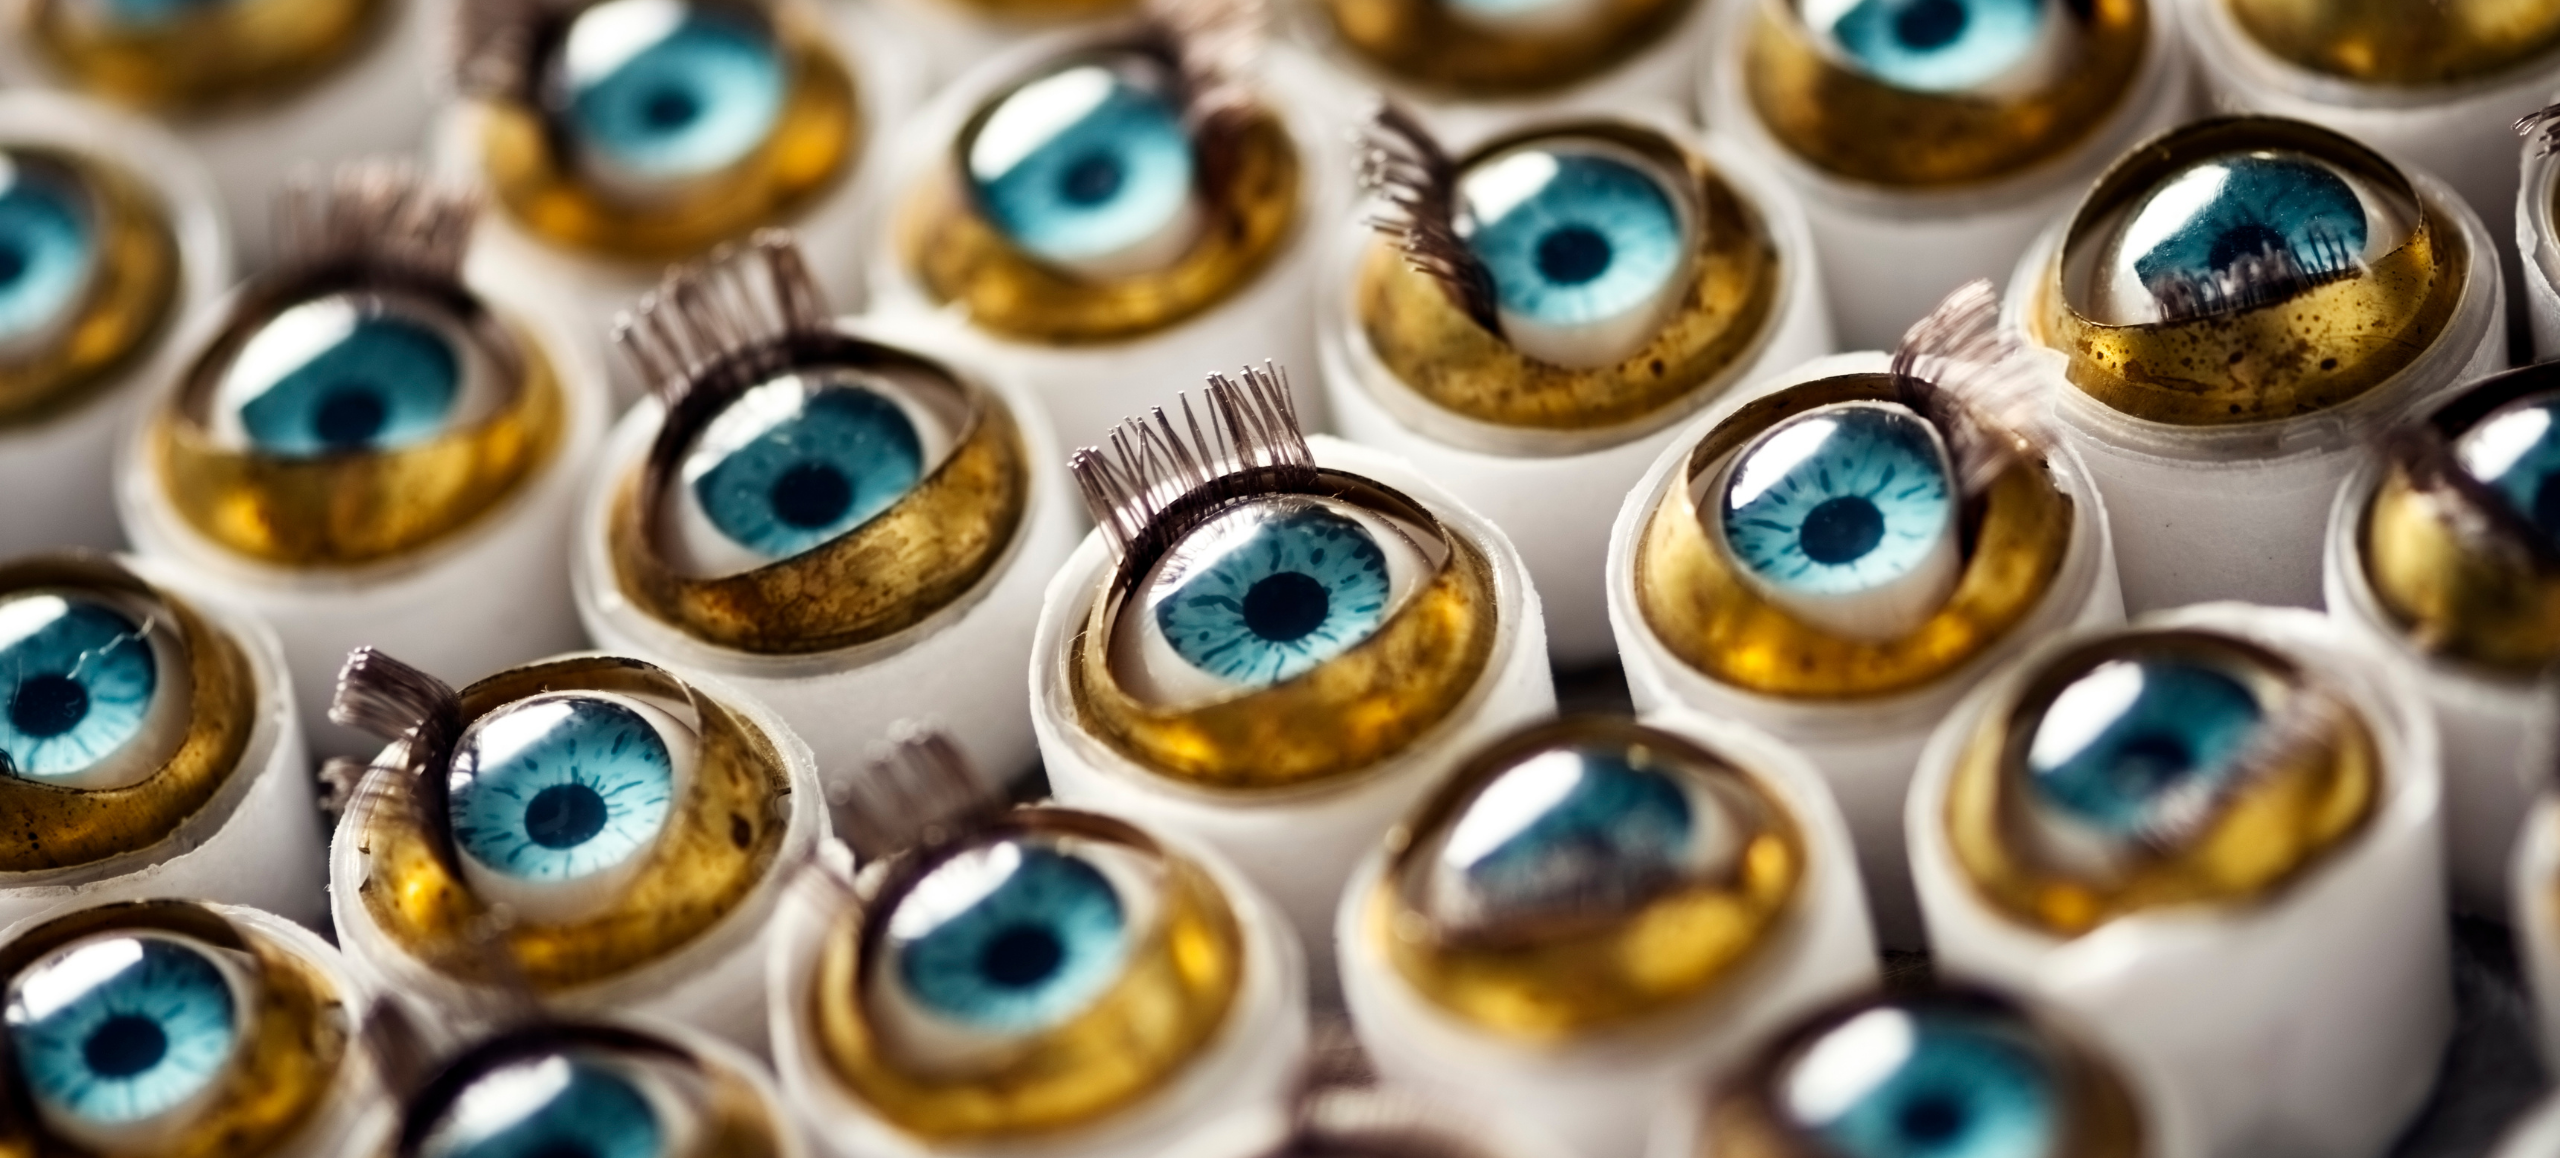 Photo of dozens of blue doll eyes with eyelashes. They each lie in a tiny plastic cup.